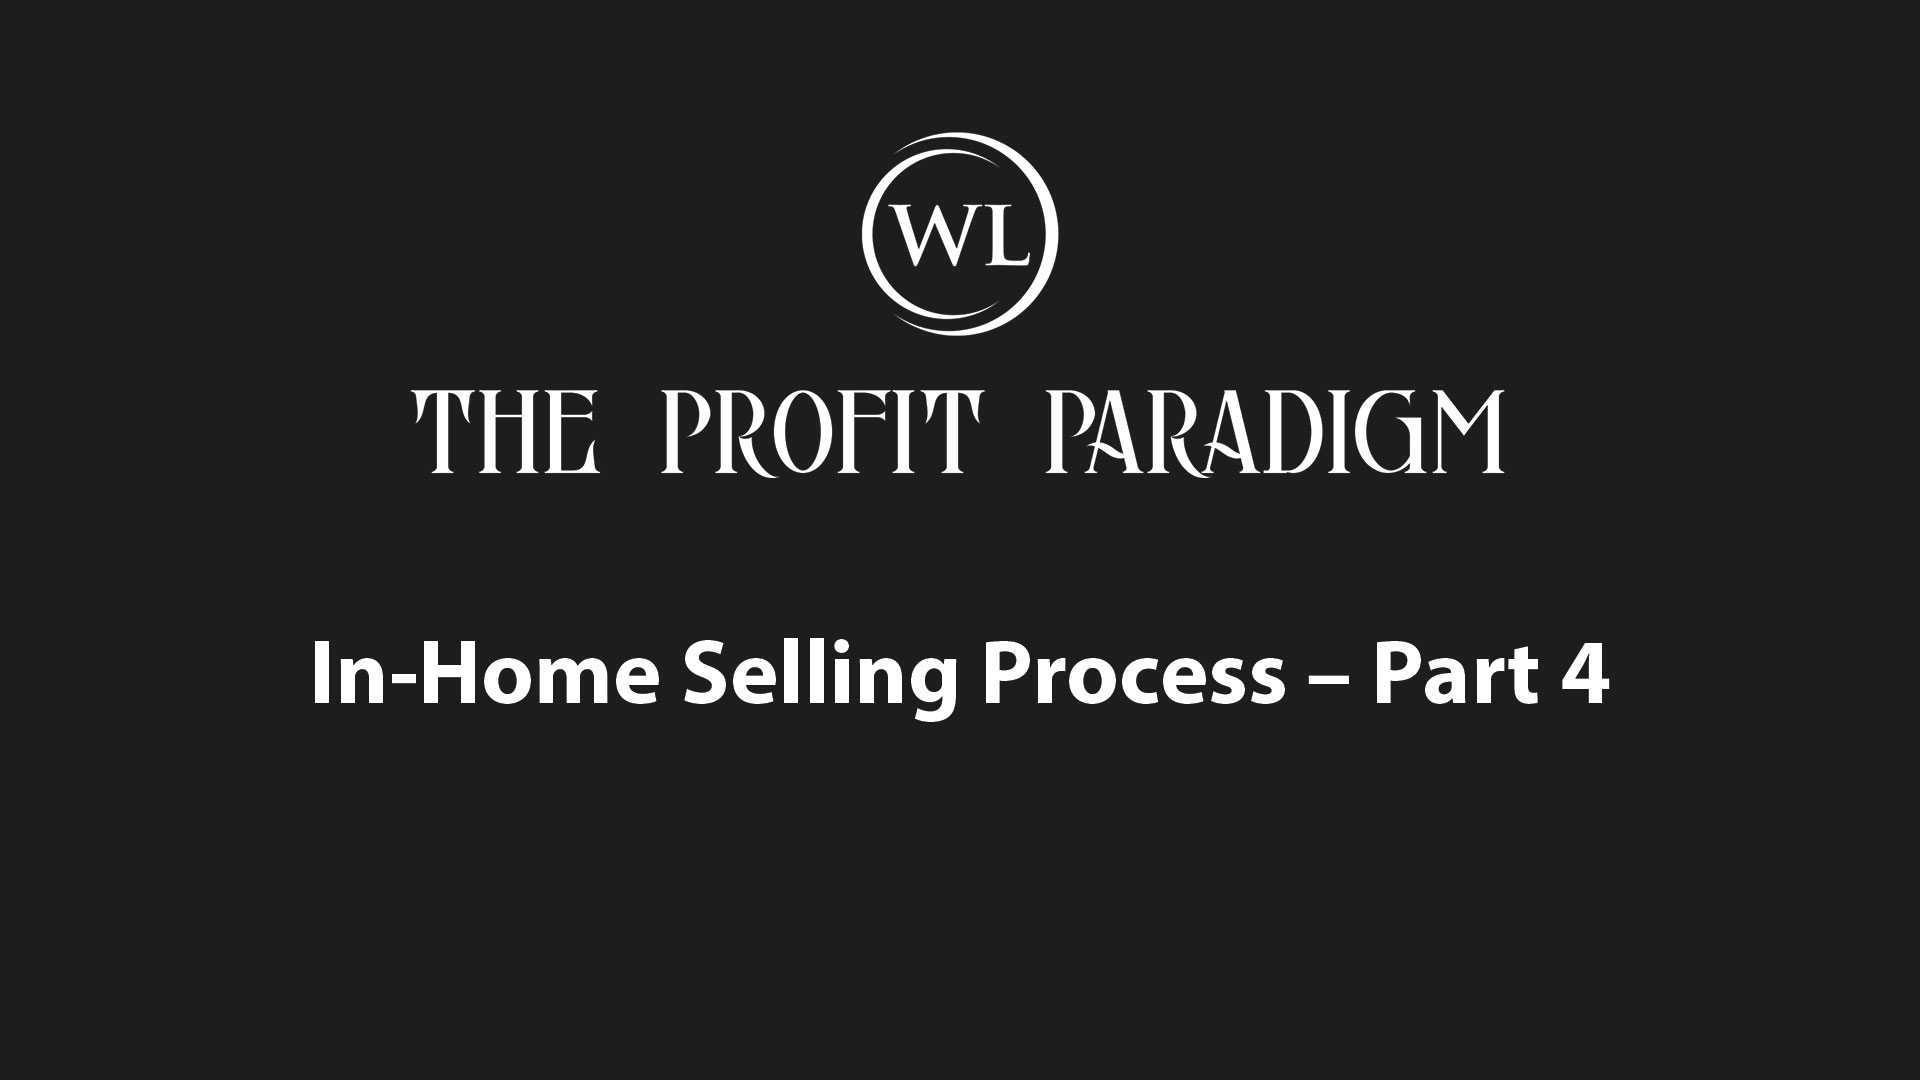 In-Home Selling Process – Part 4